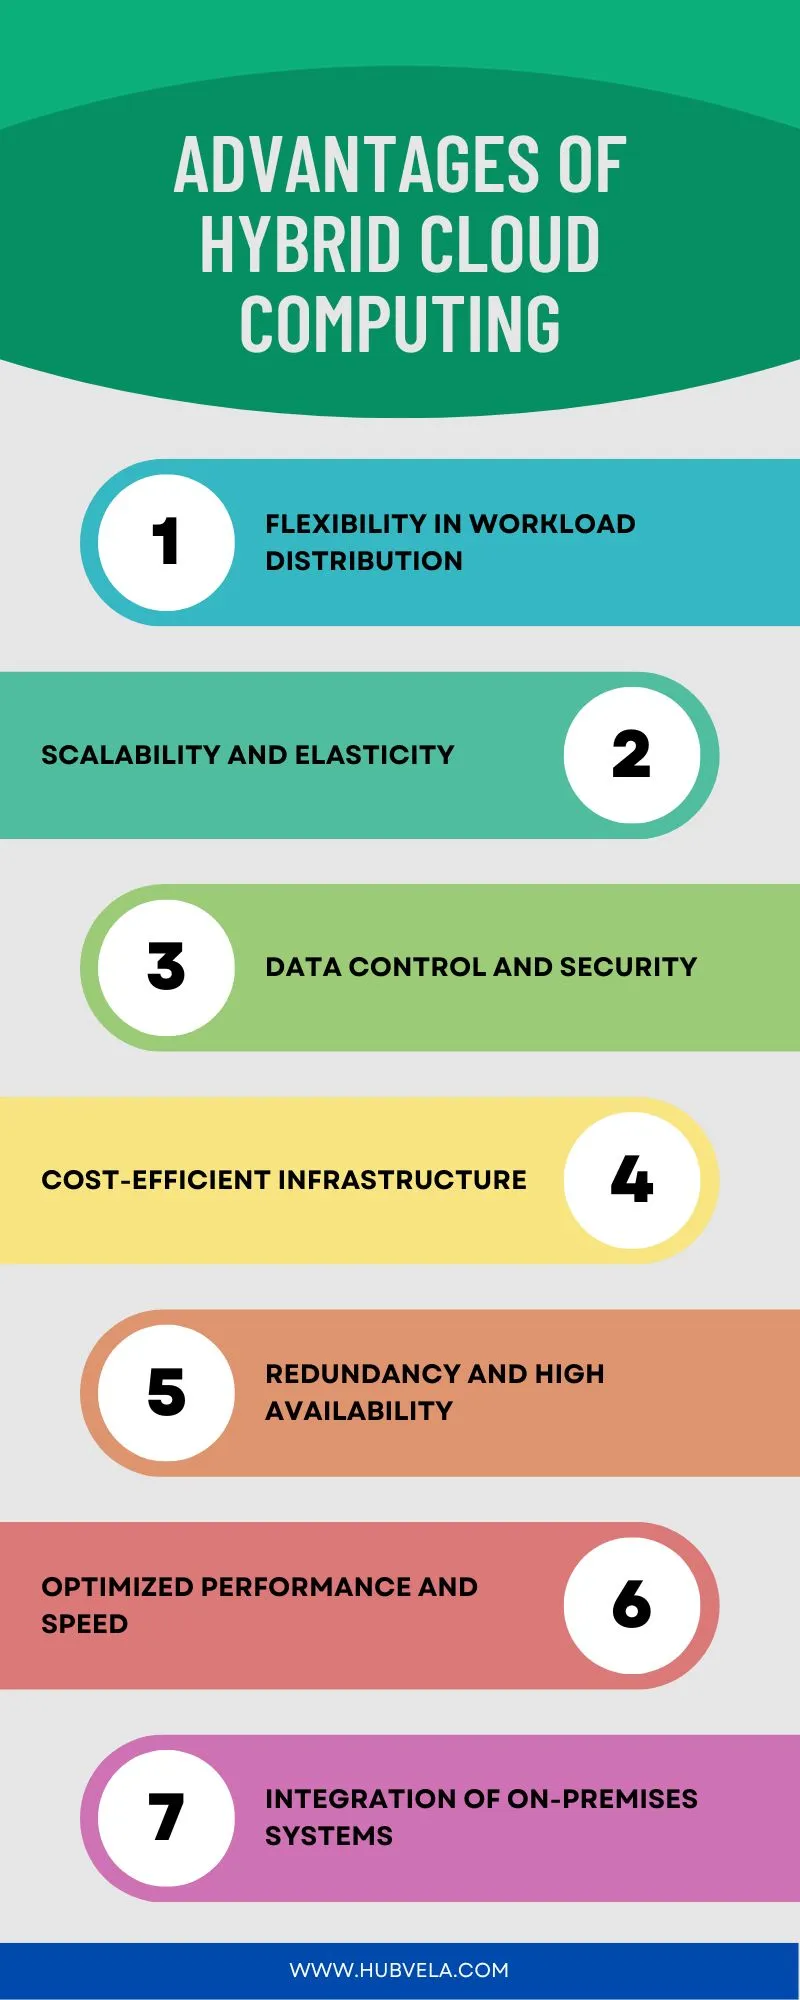 Advantages of Hybrid Cloud Computing Infographic